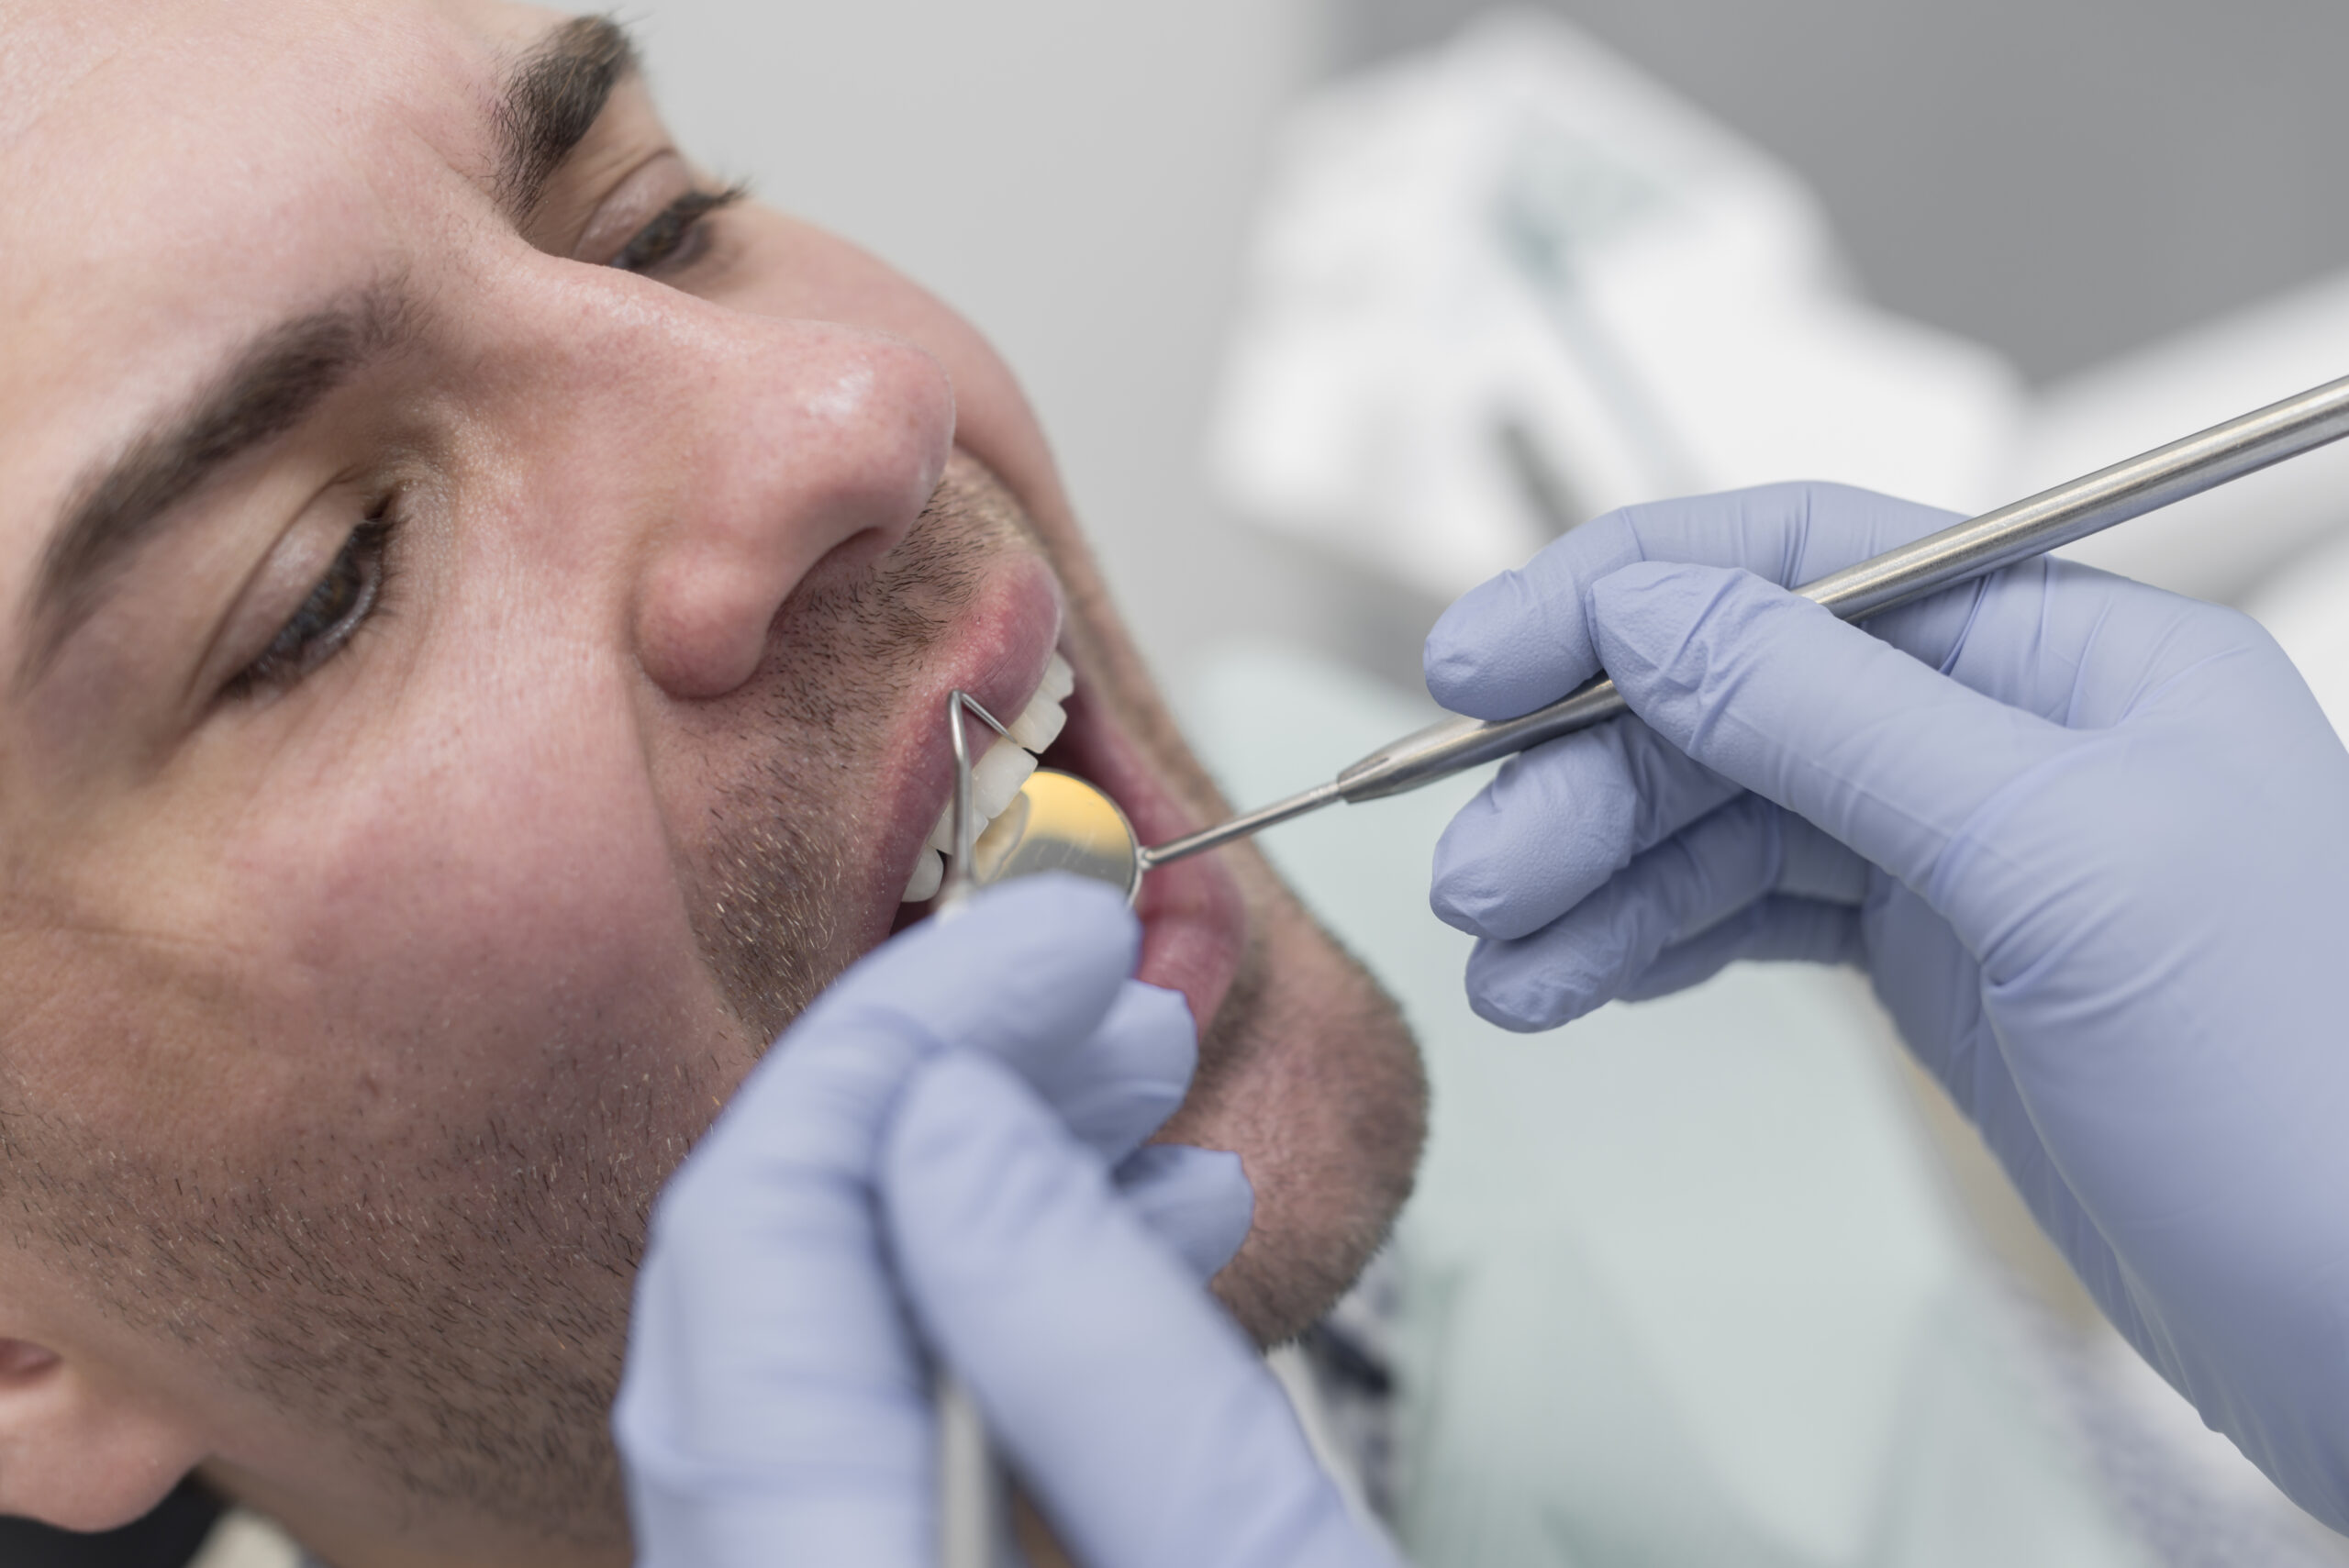 Tips for overcoming dental anxiety in Frisco: practical advice on choosing a supportive dentist, communicating openly about fears, exploring relaxation techniques, scheduling appointments wisely, and seeking support options.